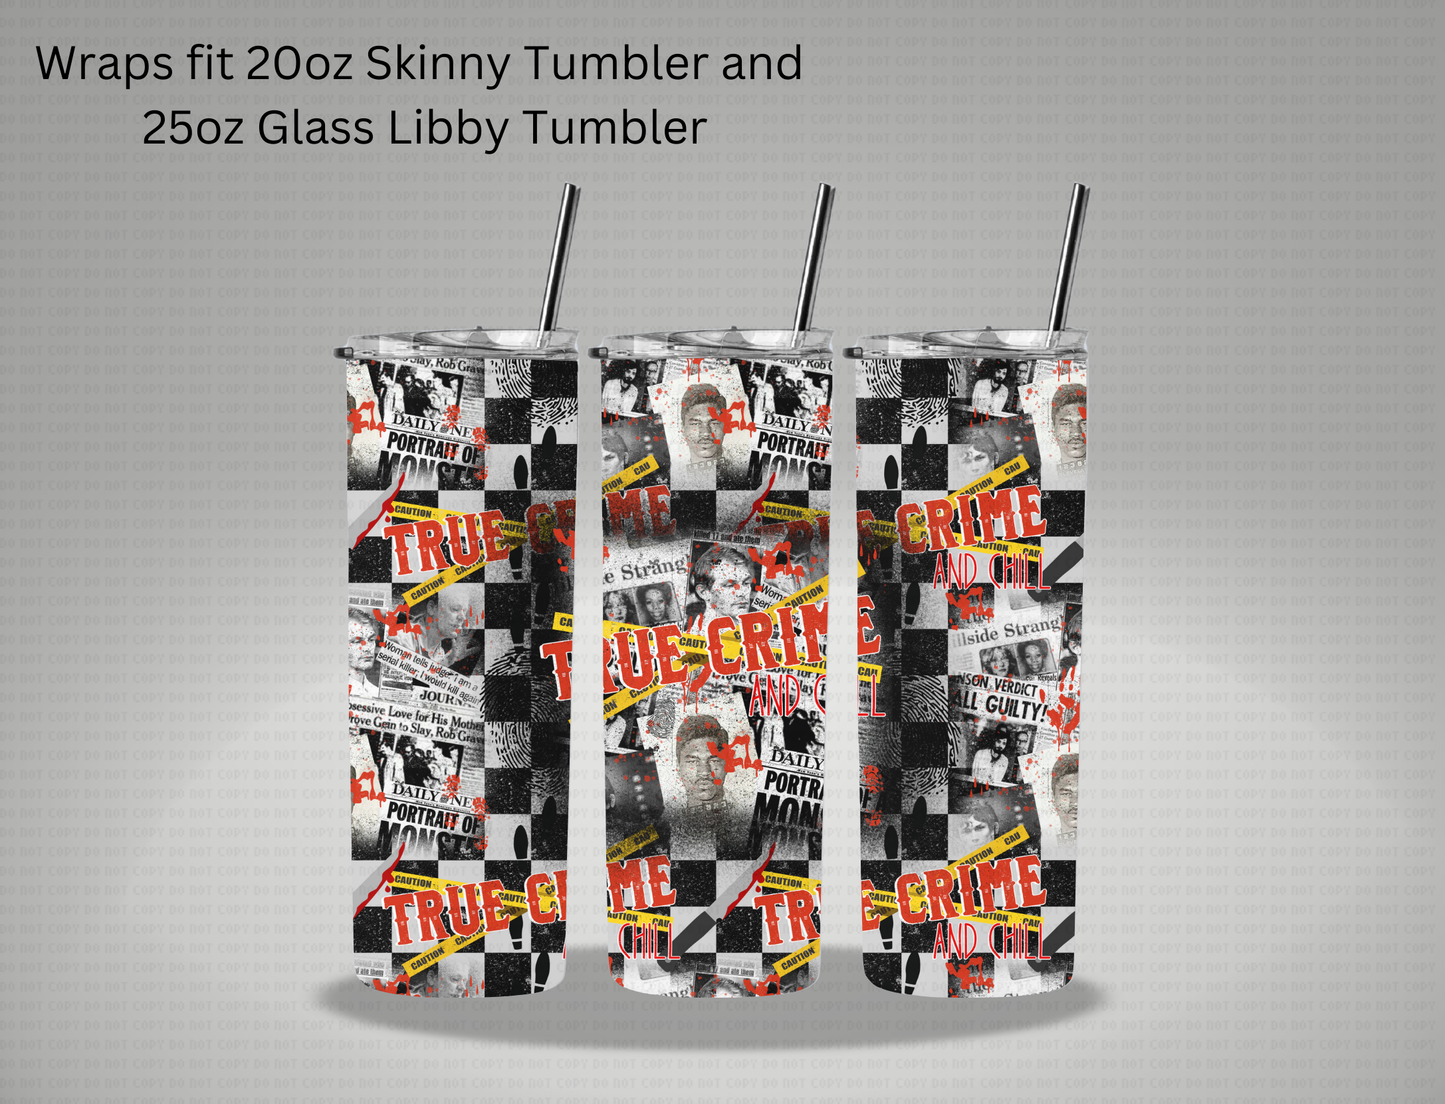 Halloween True Crime and Chill - 20oz Skinny Tumbler / 25 Oz Glass Tumbler Wrap CSTAGE EXCLUSIVE